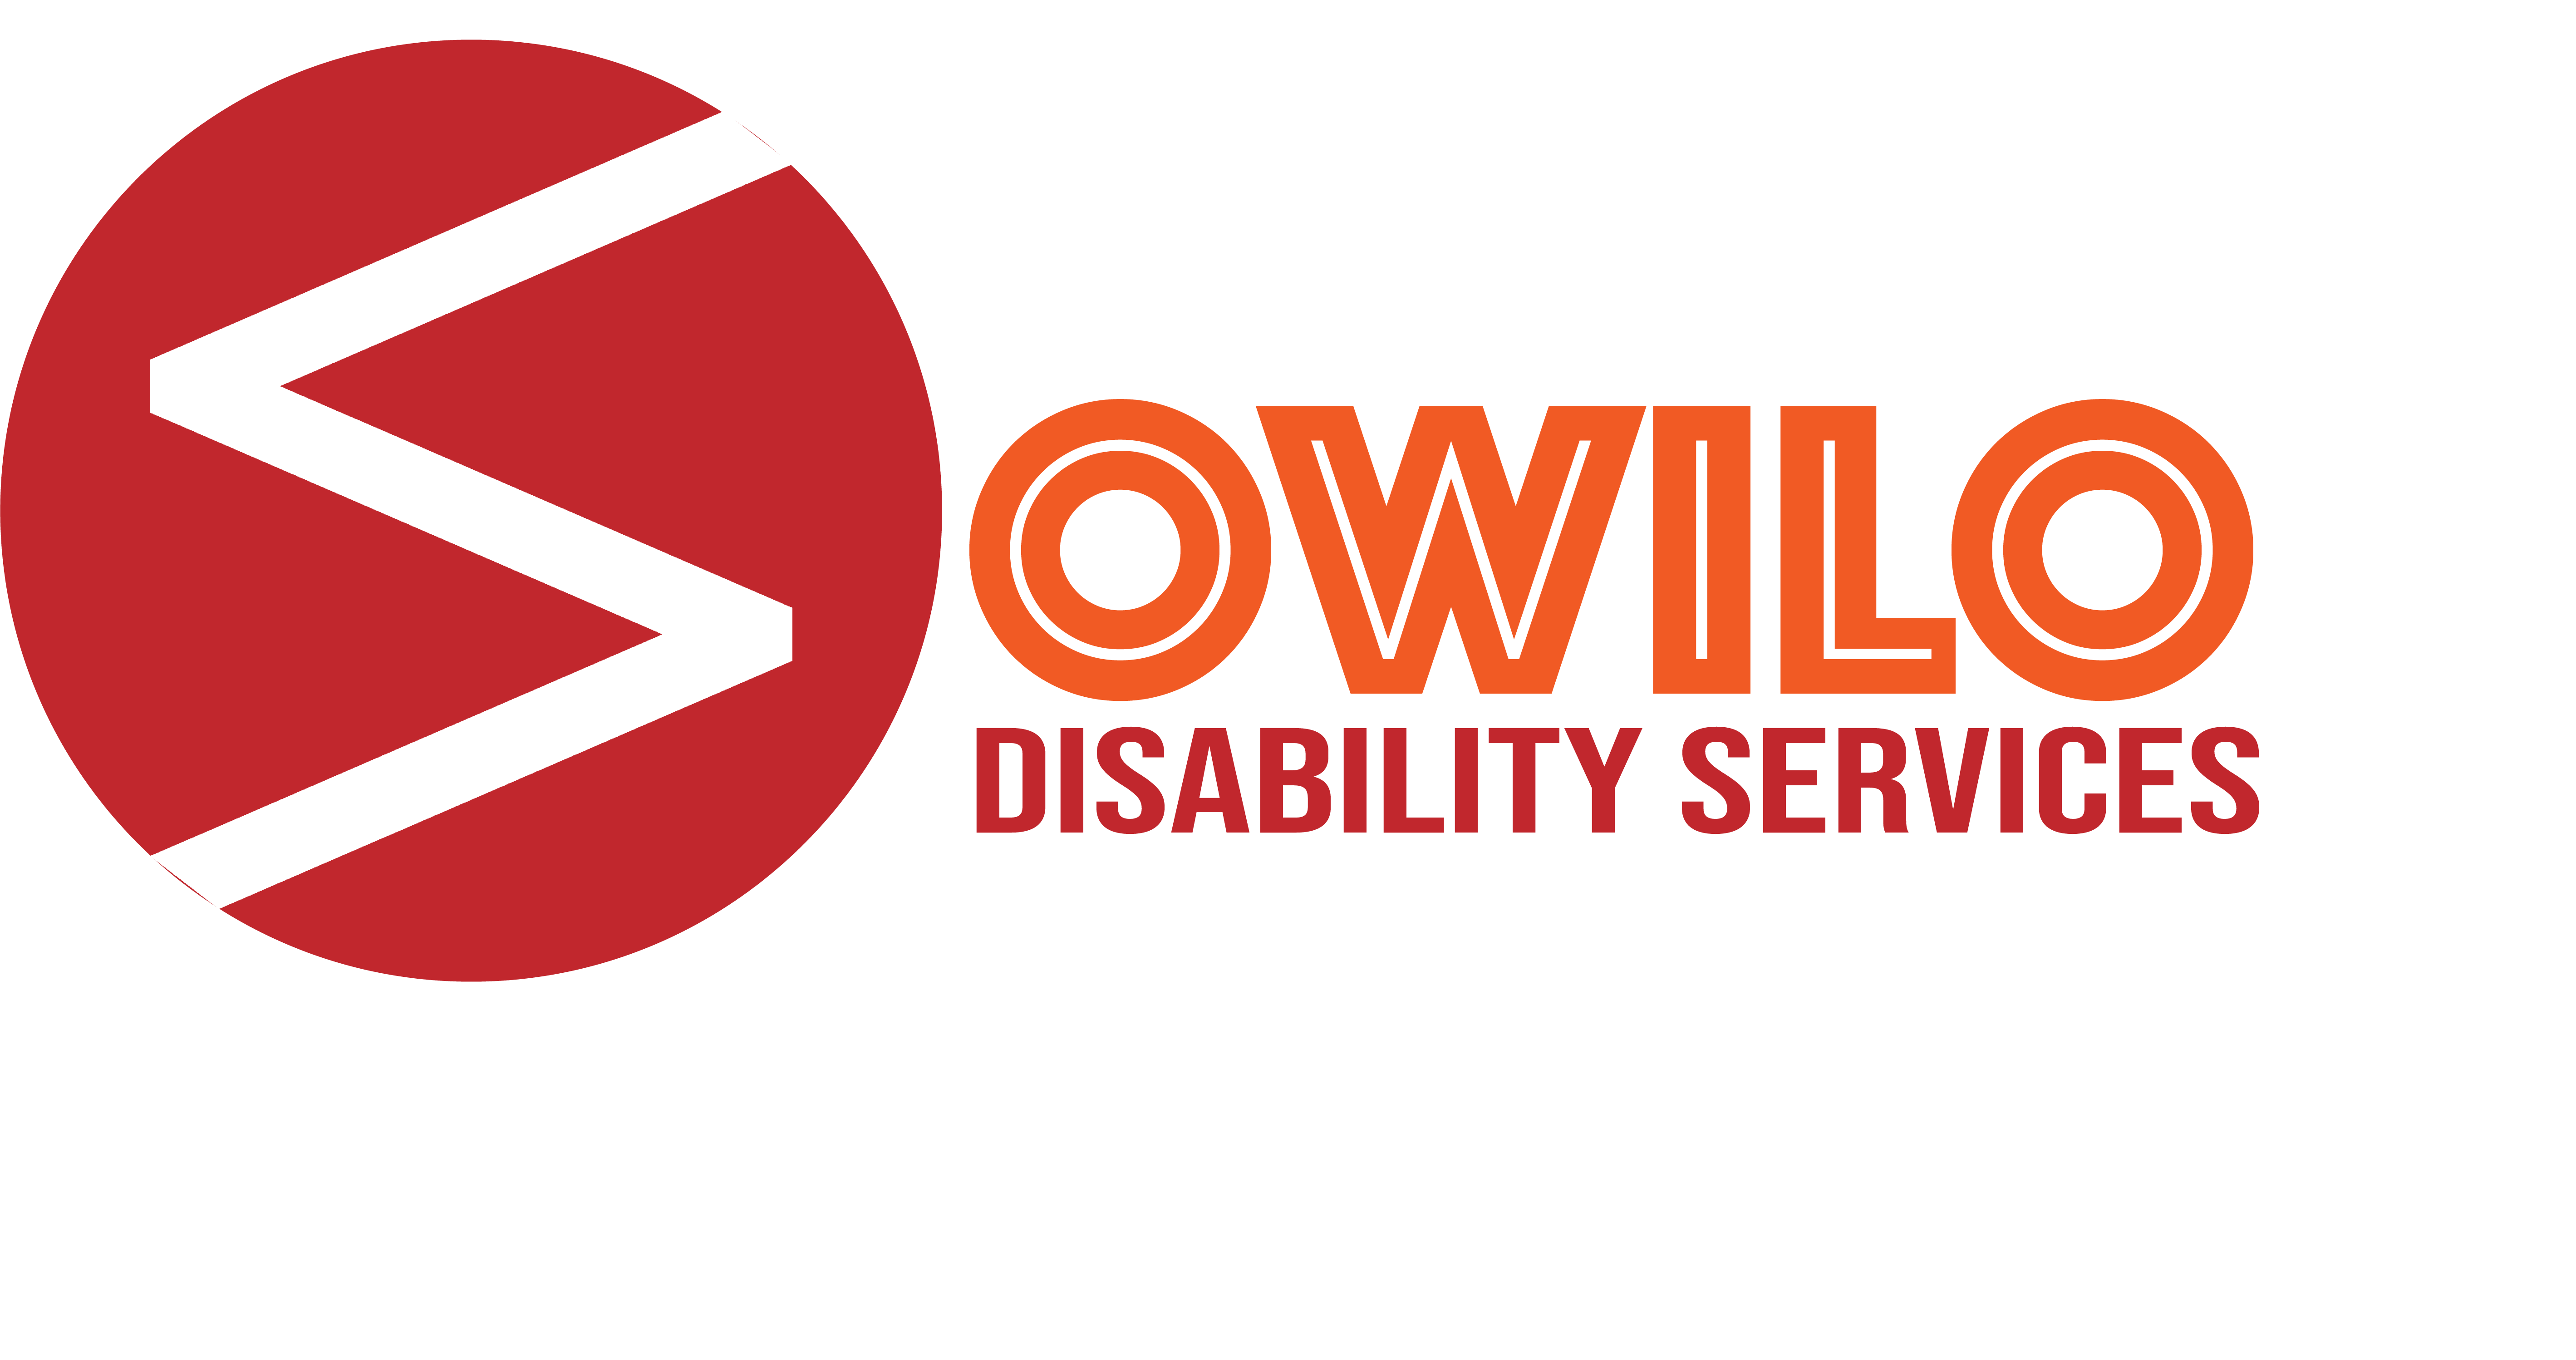 SOWILO DISABILITY SERVICES Logo